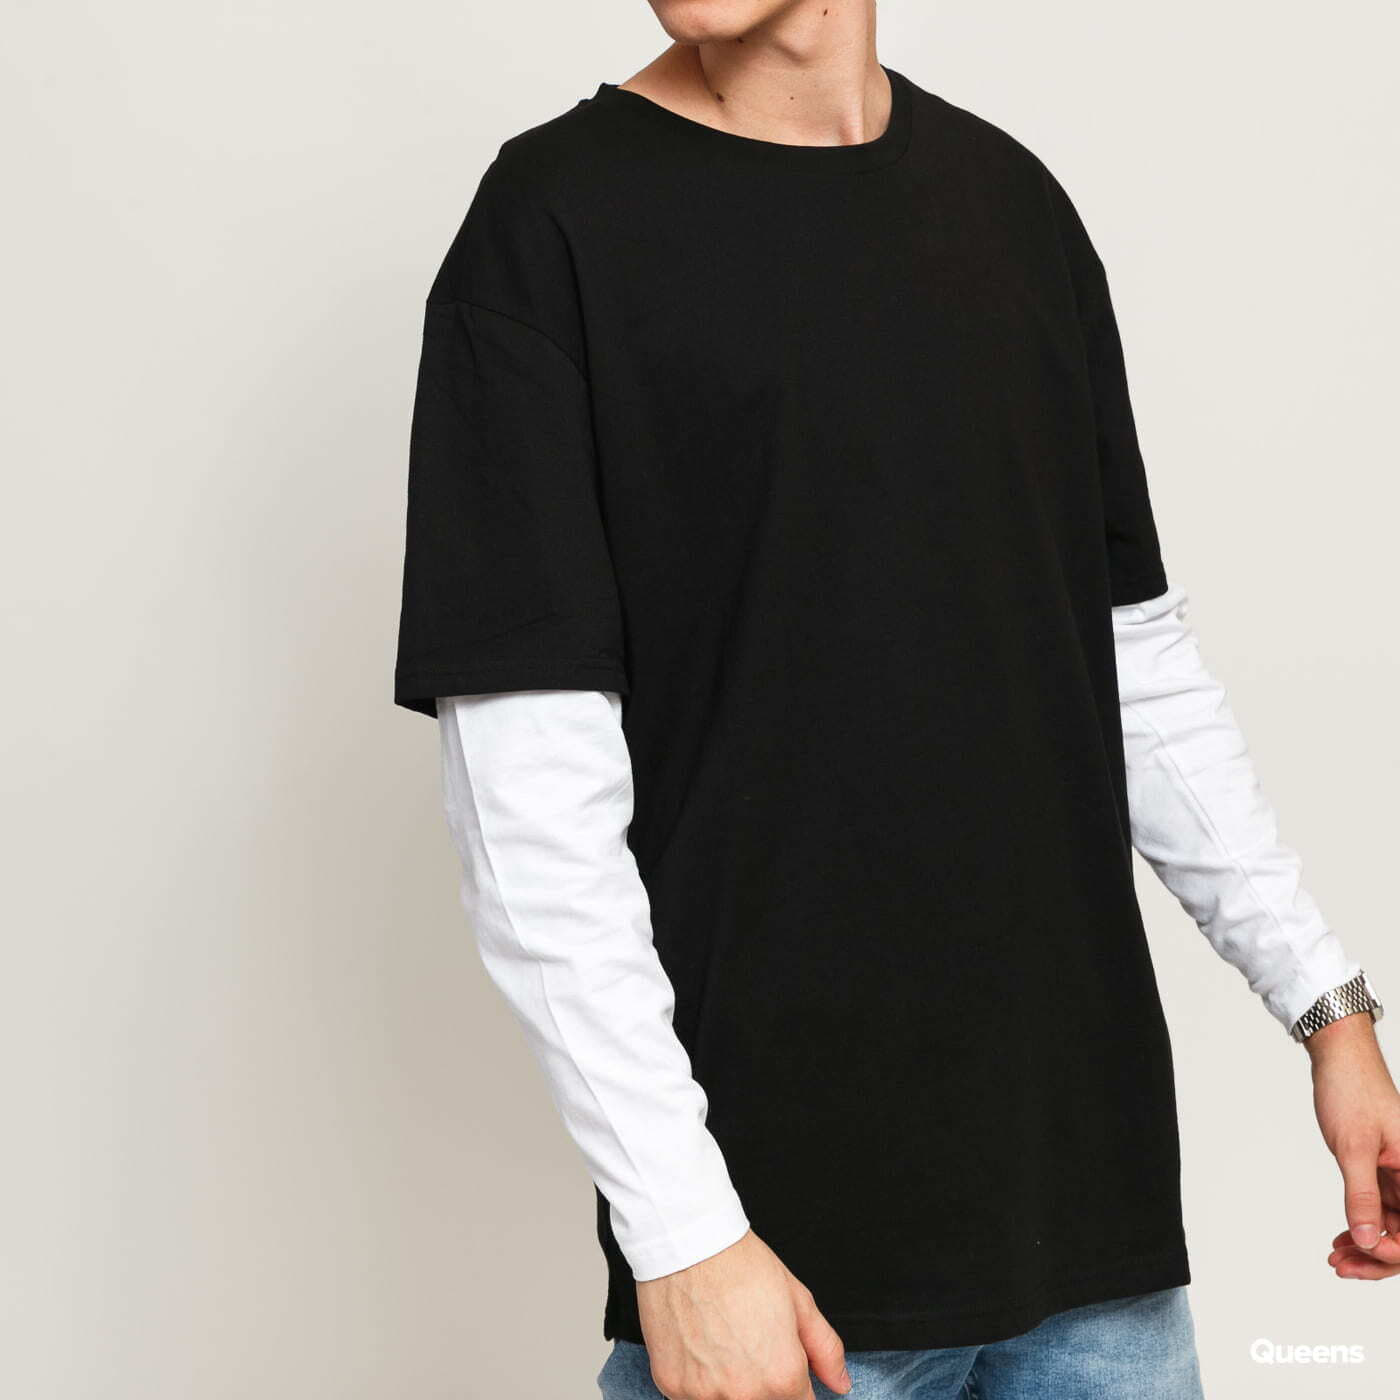 Tee Layer Black/ Queens T-shirts LS Double Shaped Urban | Oversized Classics White